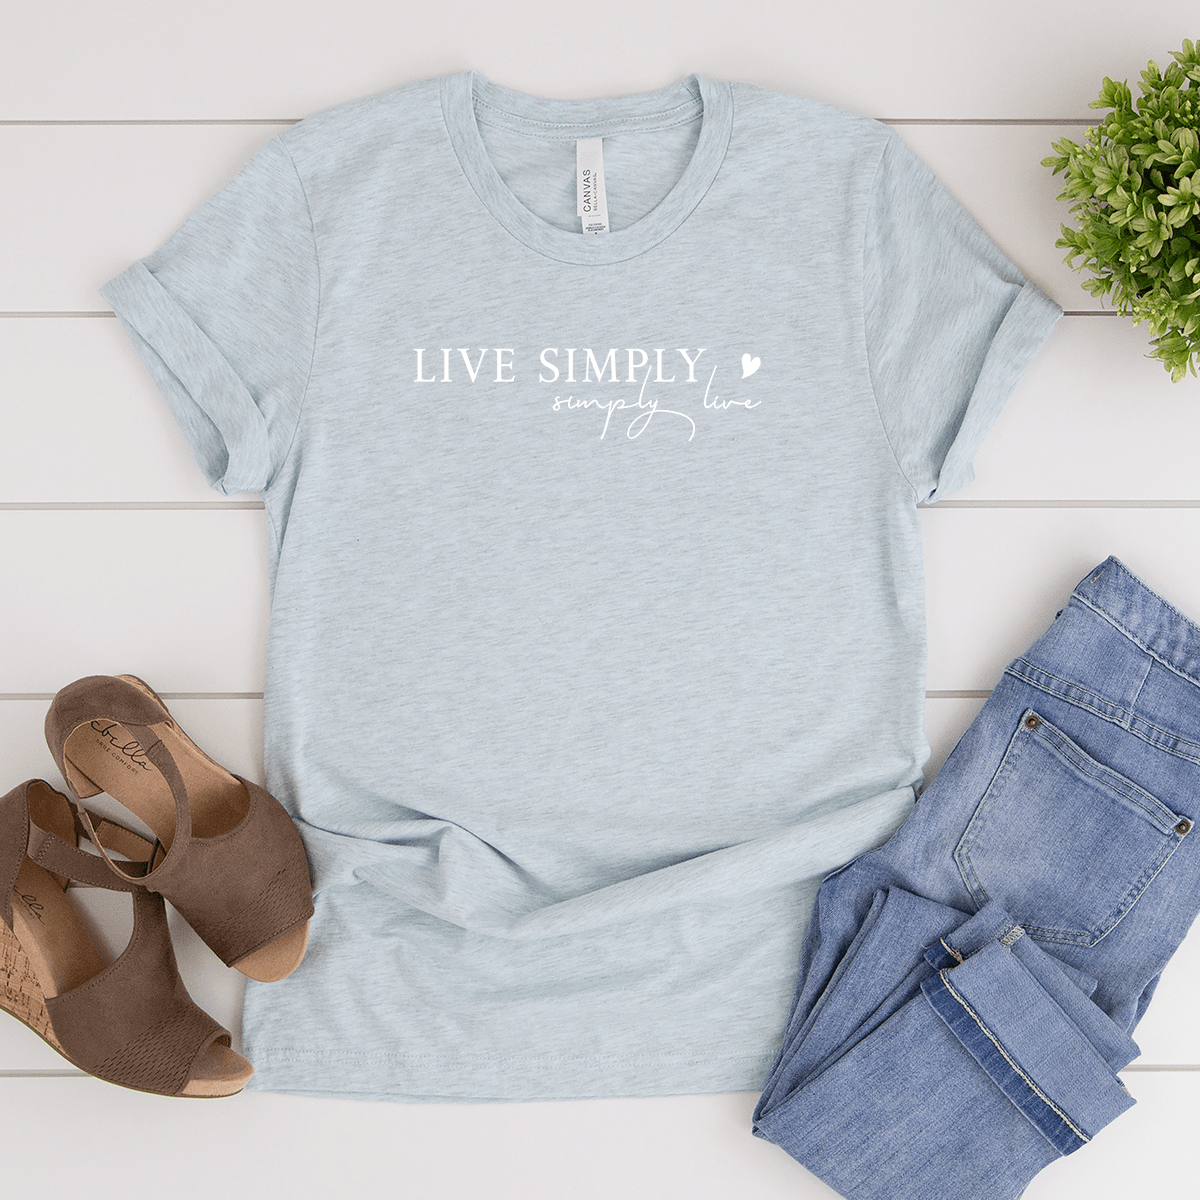 Live Simply, Simply Live - Bella+Canvas Tee